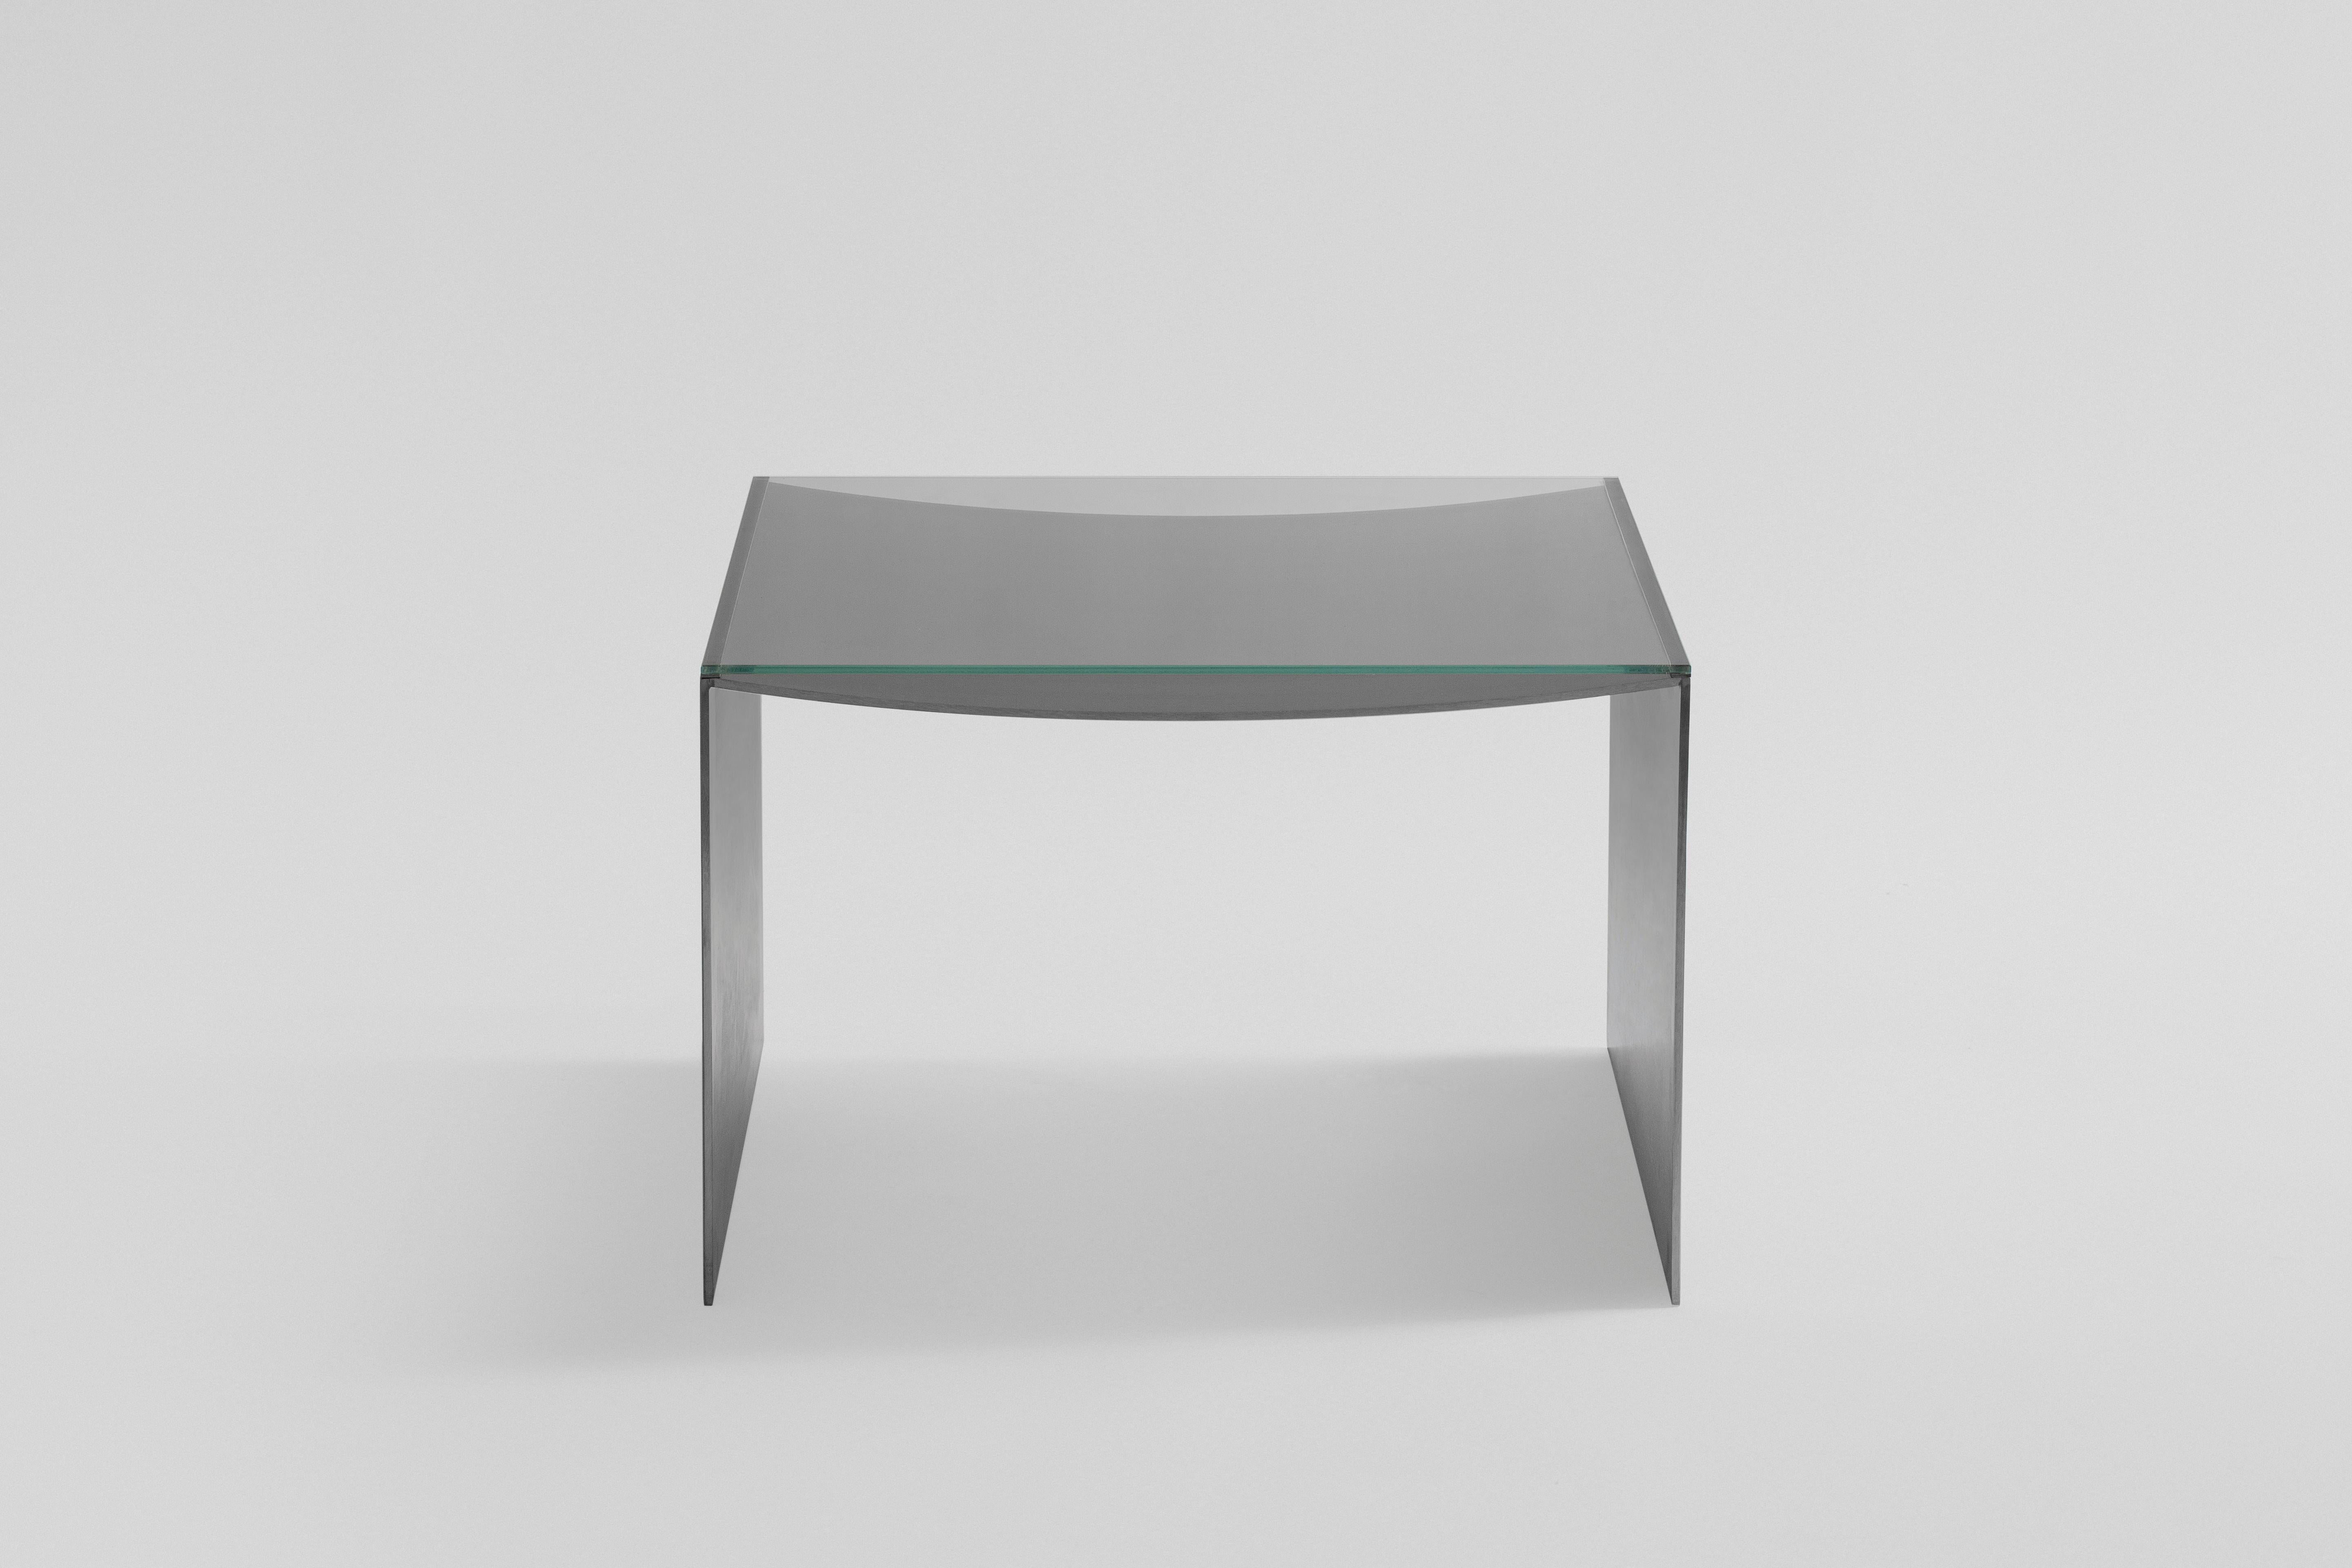 A subtle line curved by the effect of gravity and the same weight of the material that starts at one end and ends, in the same way, is the prime of this table. 

The physical properties of the material used and its finishes make Deflect cause